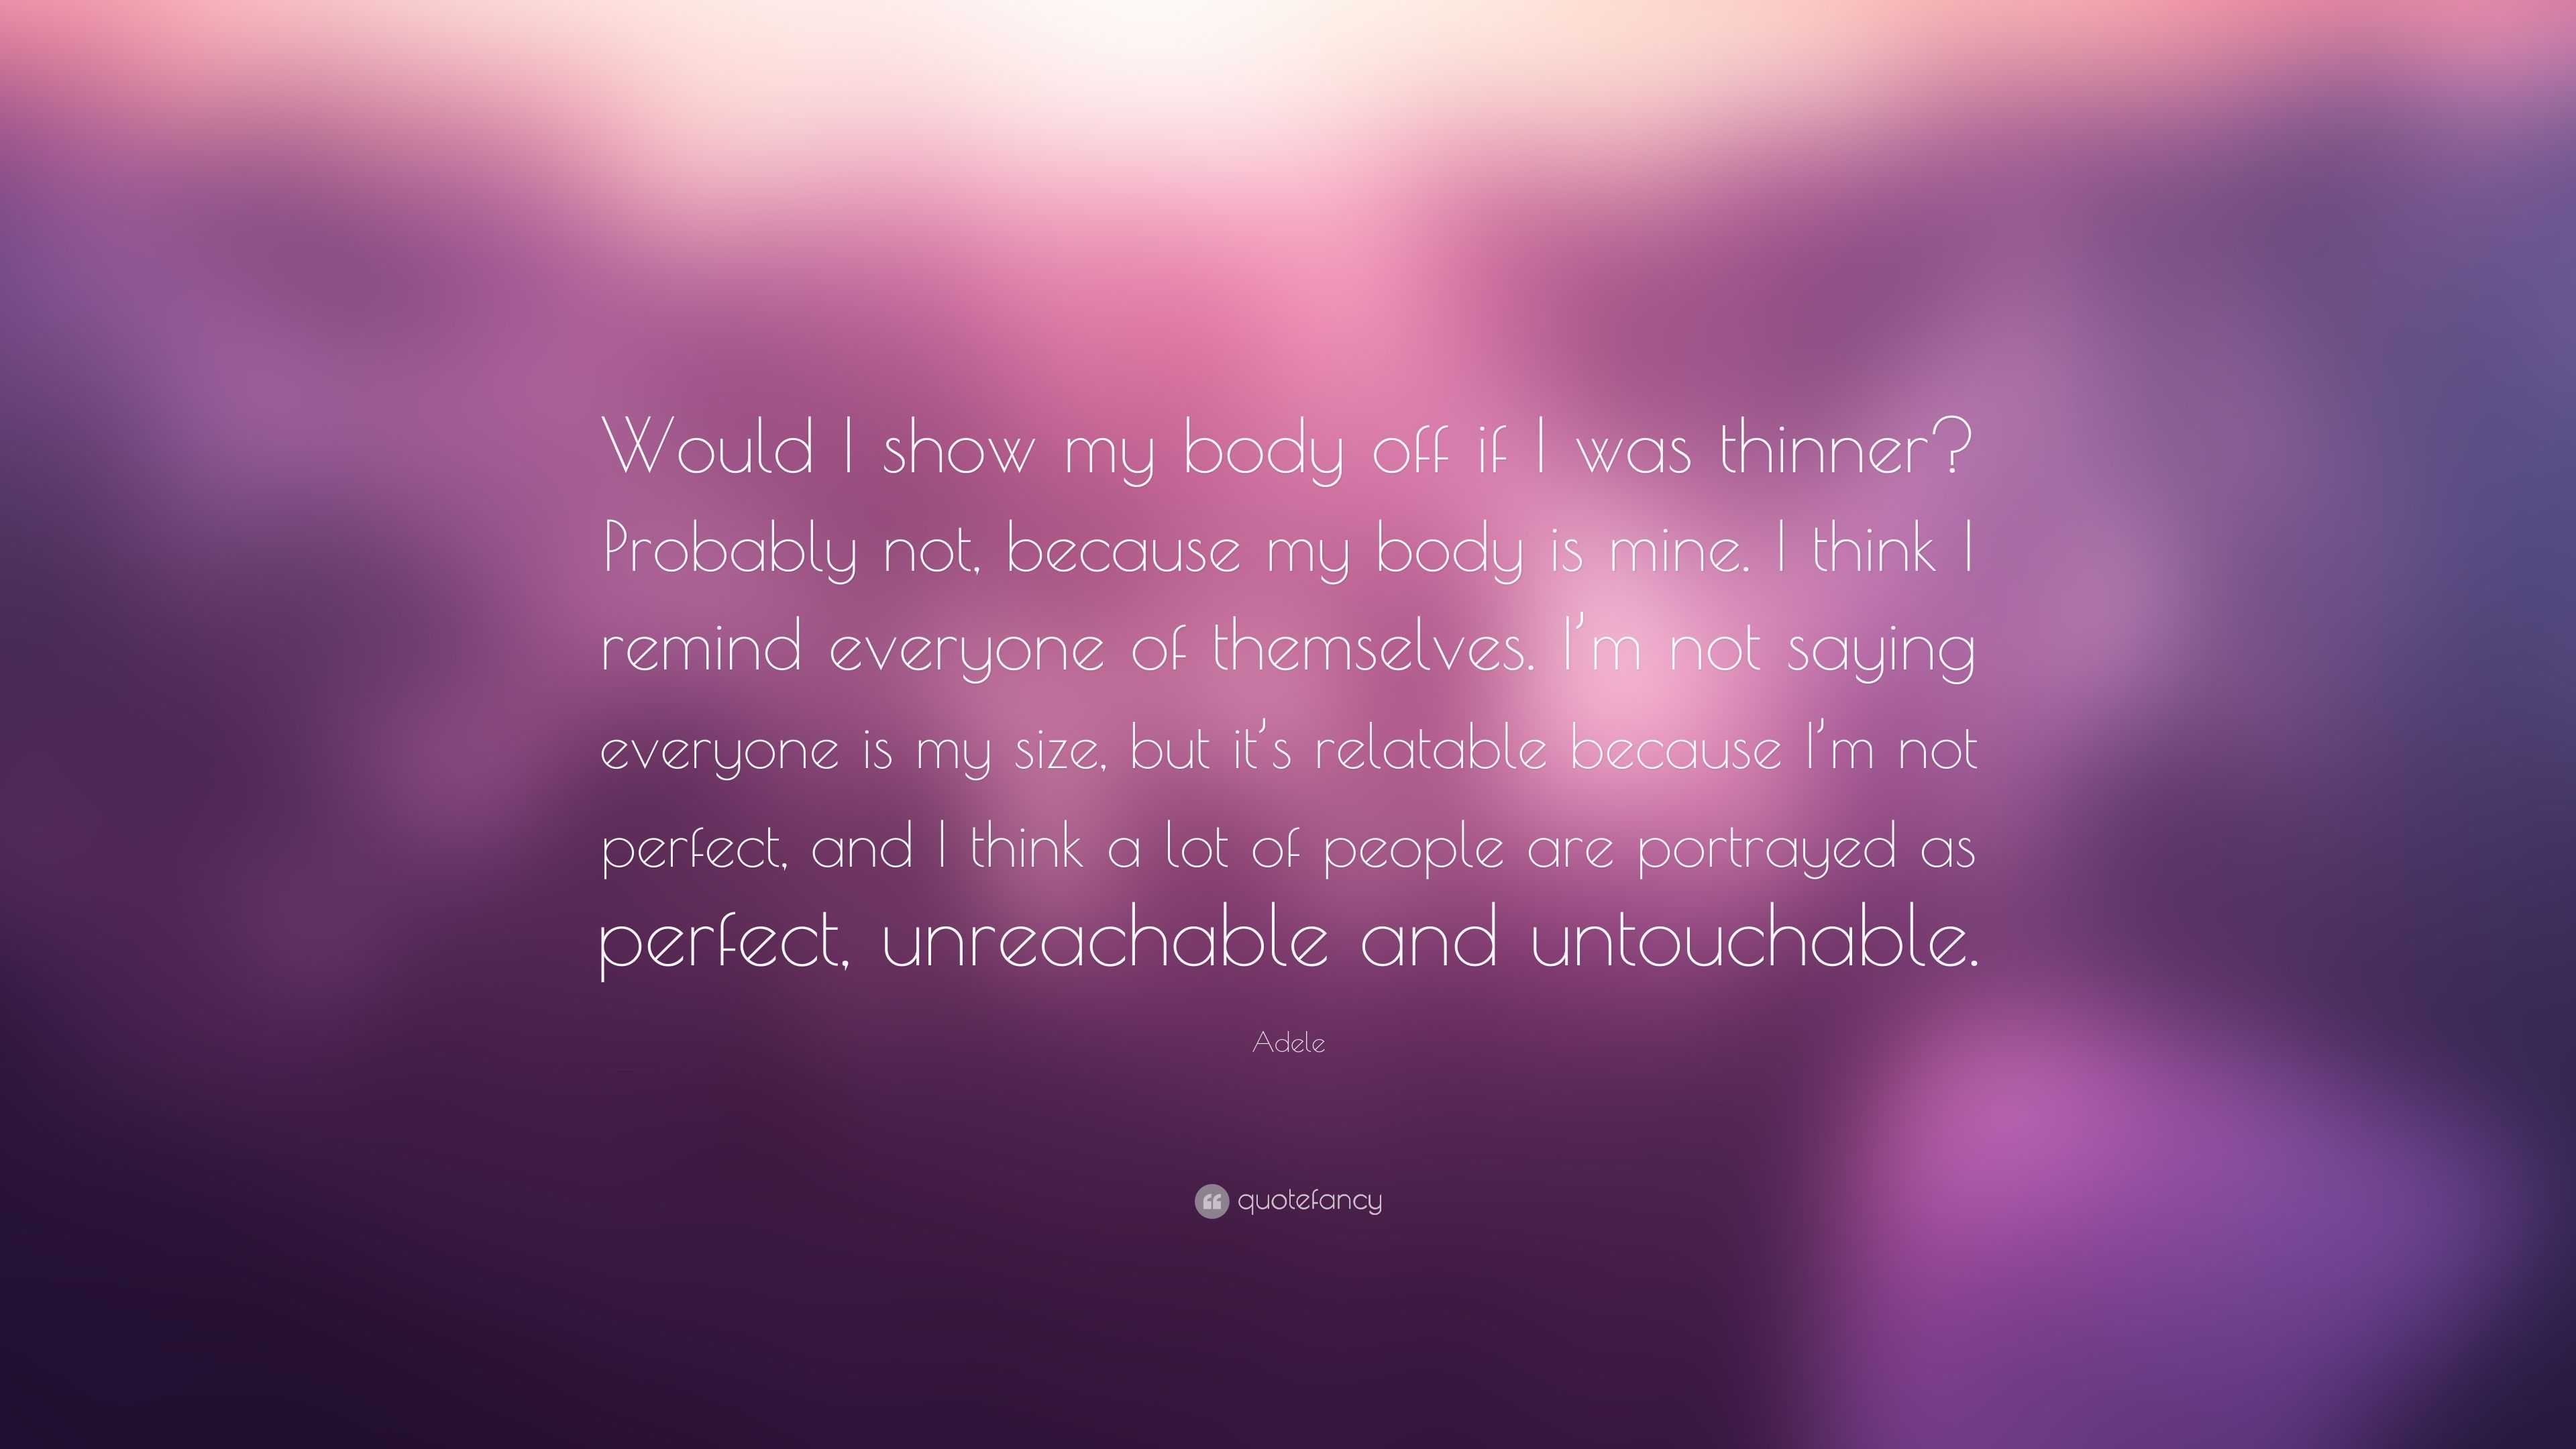 Adele Quote: “Would I show my body off if I was thinner? Probably not ...